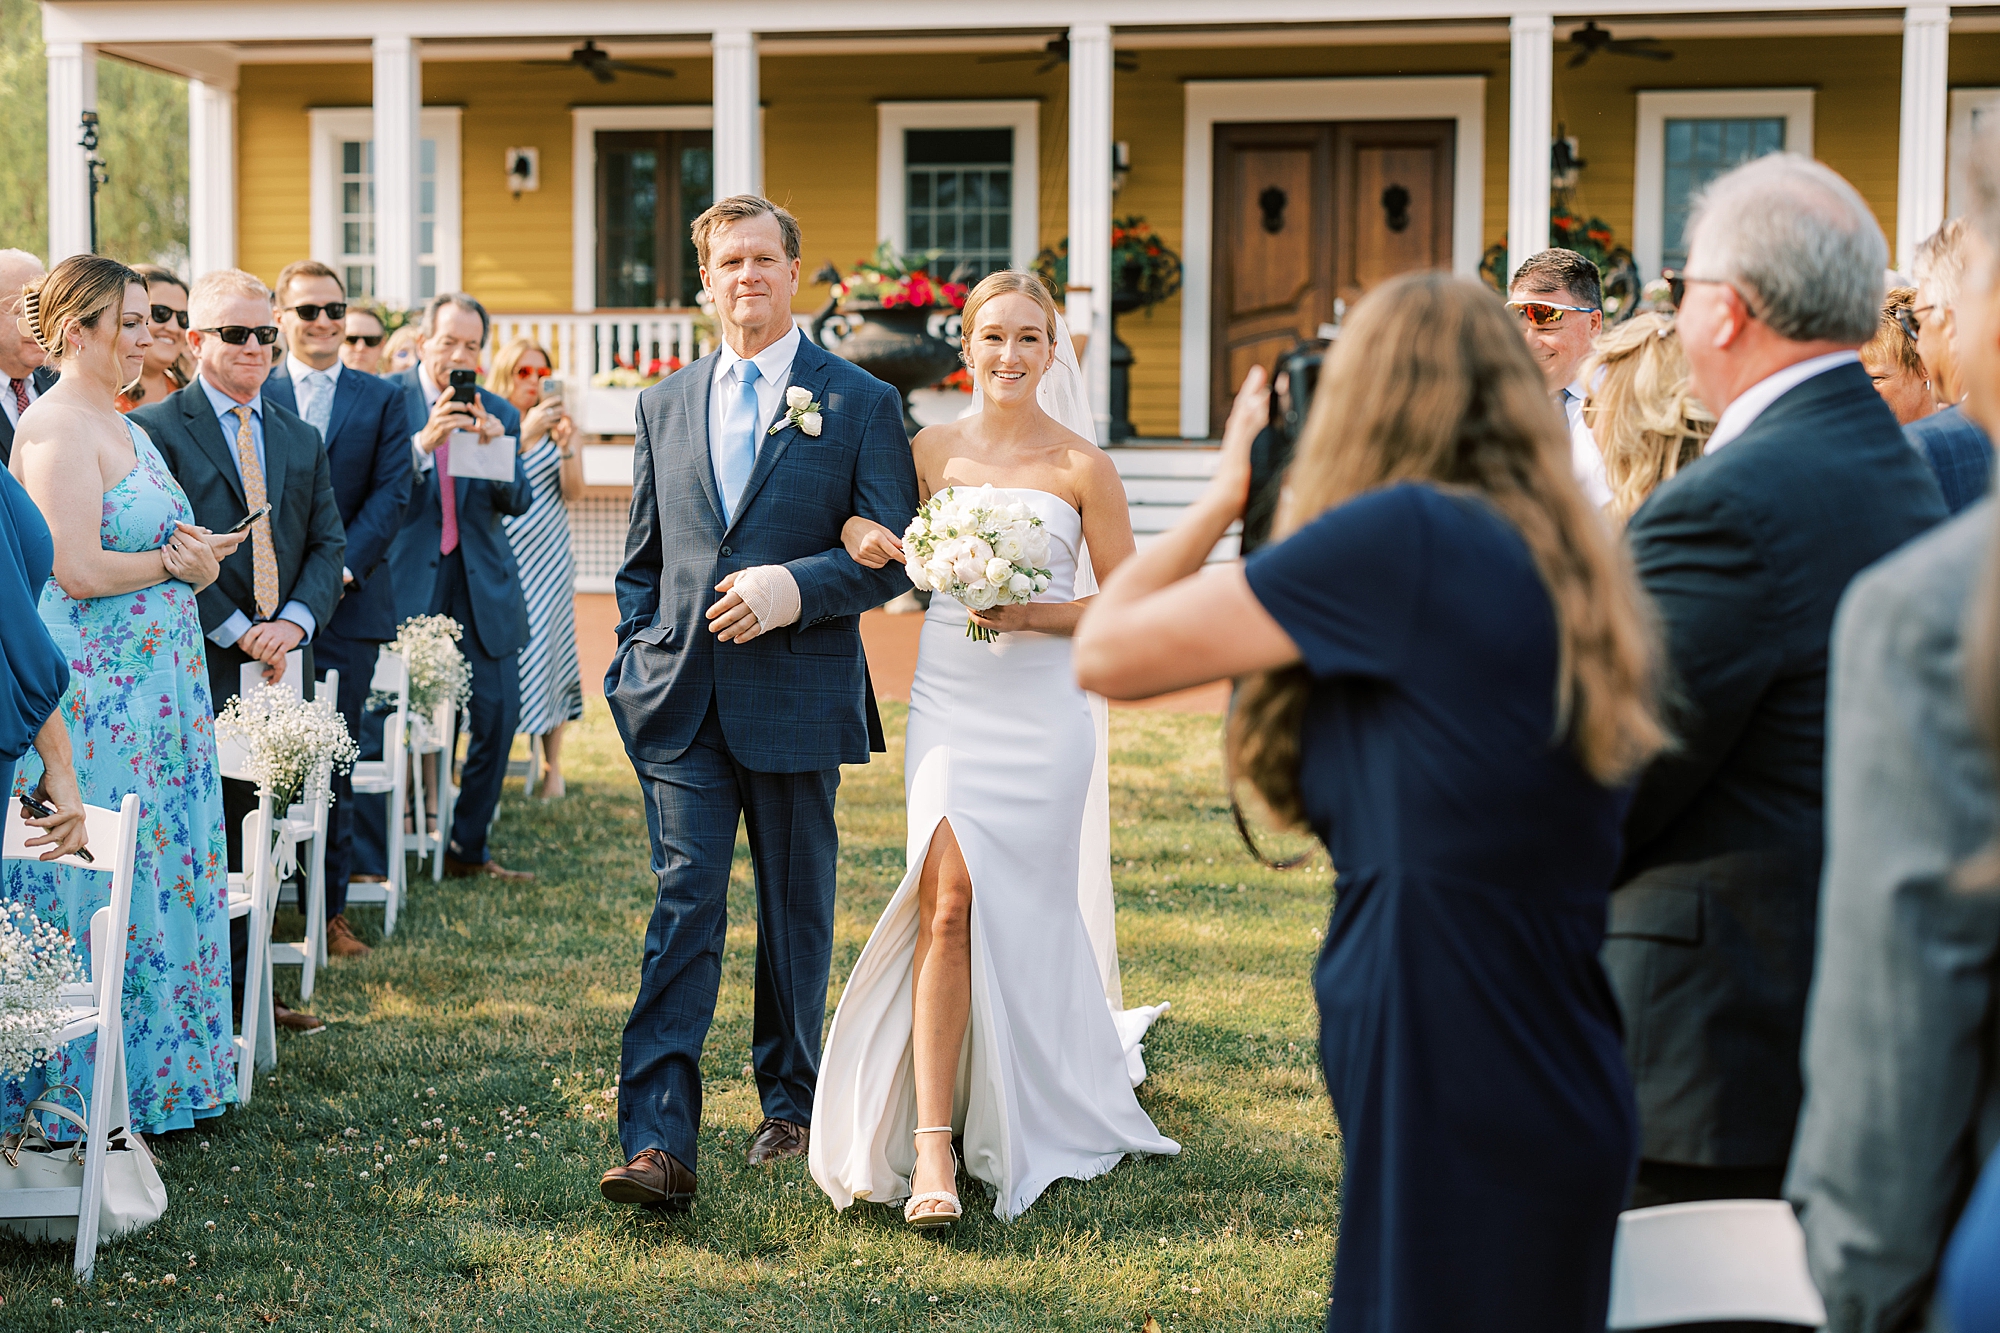 bride walks up aisle with father for wedding ceremony at Willow Creek Winery